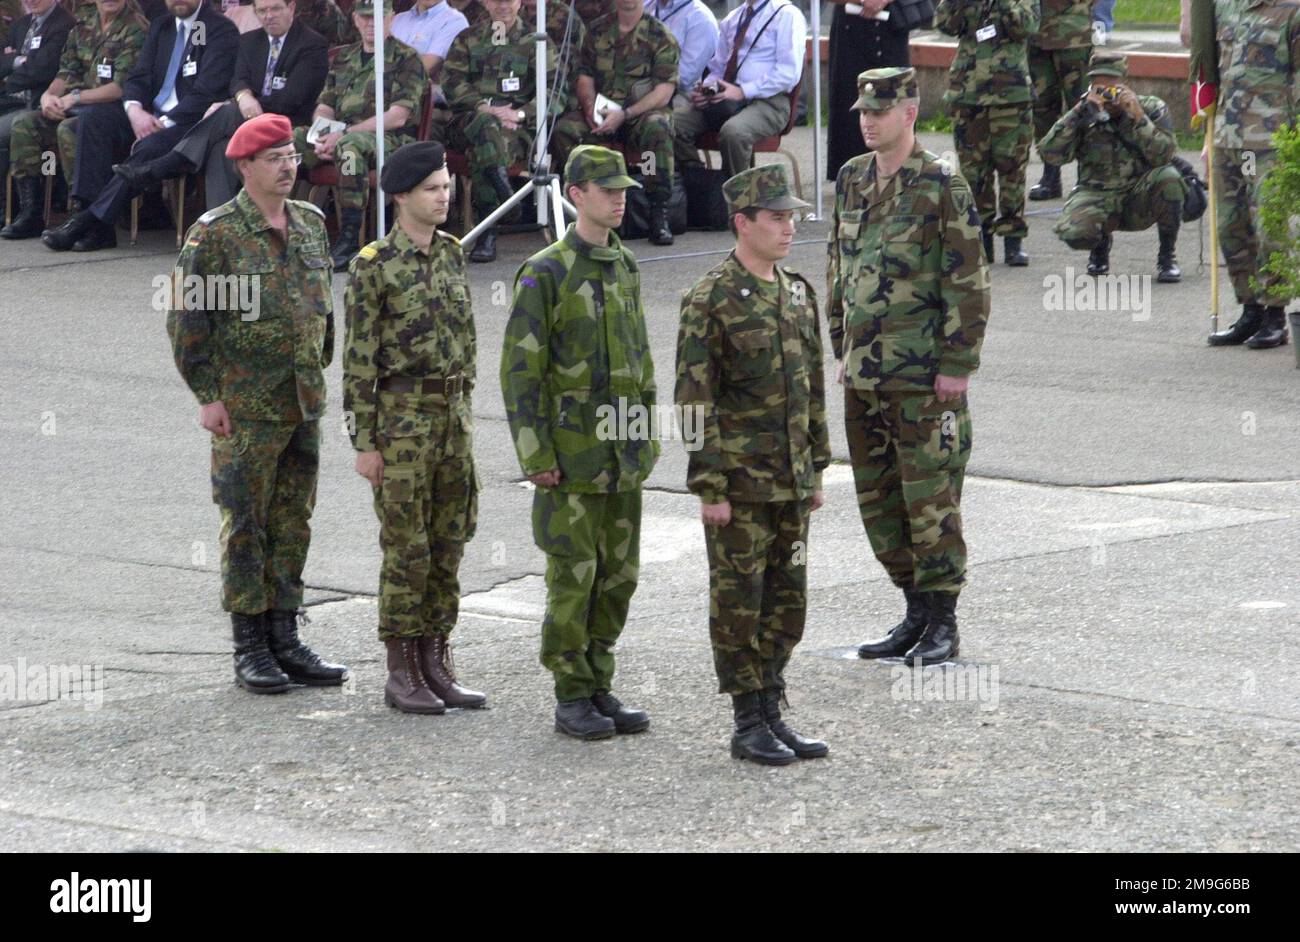 Participants of COMBINED ENDEAVOR 2001 stand at attention at the closing ceremony. This marks the end of the Combined Endeavor in Lager Aulenbach, Germany. Sponsored by the US European Command and hosted by Germany, the exercise is held annually to test and document the interoperability of dozens of countries and NATO. The largest communications and information systems in the world, 37 countries participated this year. Subject Operation/Series: COMBINED ENDEAVOR 2001 Base: Lager Aulenbach State: Rheinland-Pfalz Country: Deutschland / Germany (DEU) Stock Photo